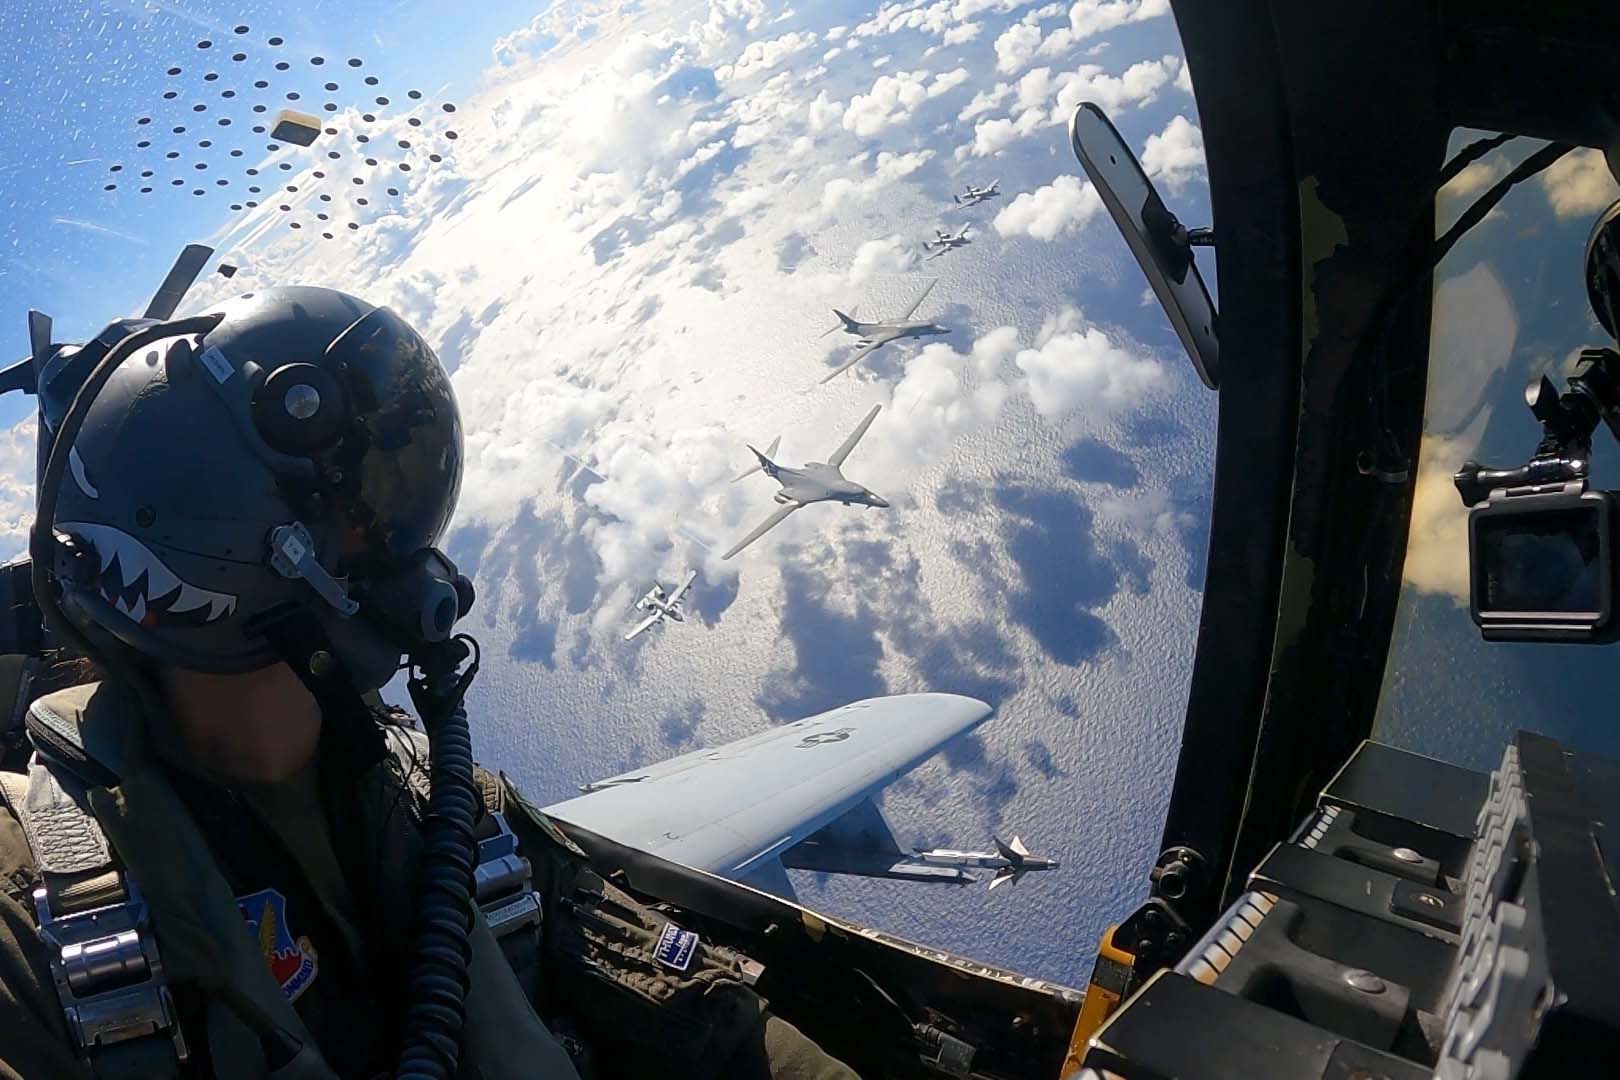 A pilot cans see multiple planes from the cockpit